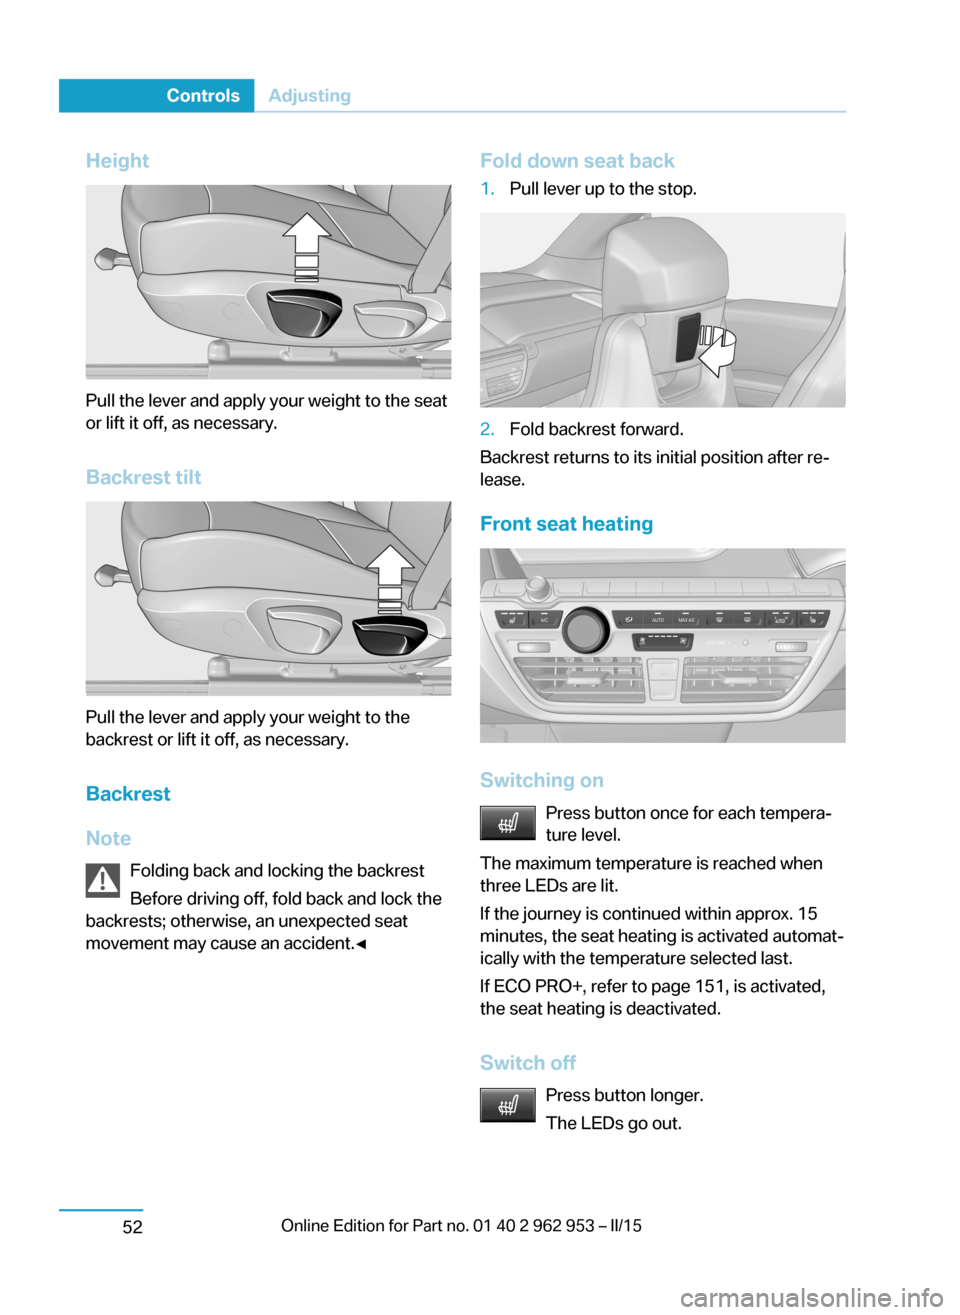 BMW I3 2014 I01 User Guide Height
Pull the lever and apply your weight to the seat
or lift it off, as necessary.
Backrest tilt
Pull the lever and apply your weight to the
backrest or lift it off, as necessary.
Backrest
Note Fol